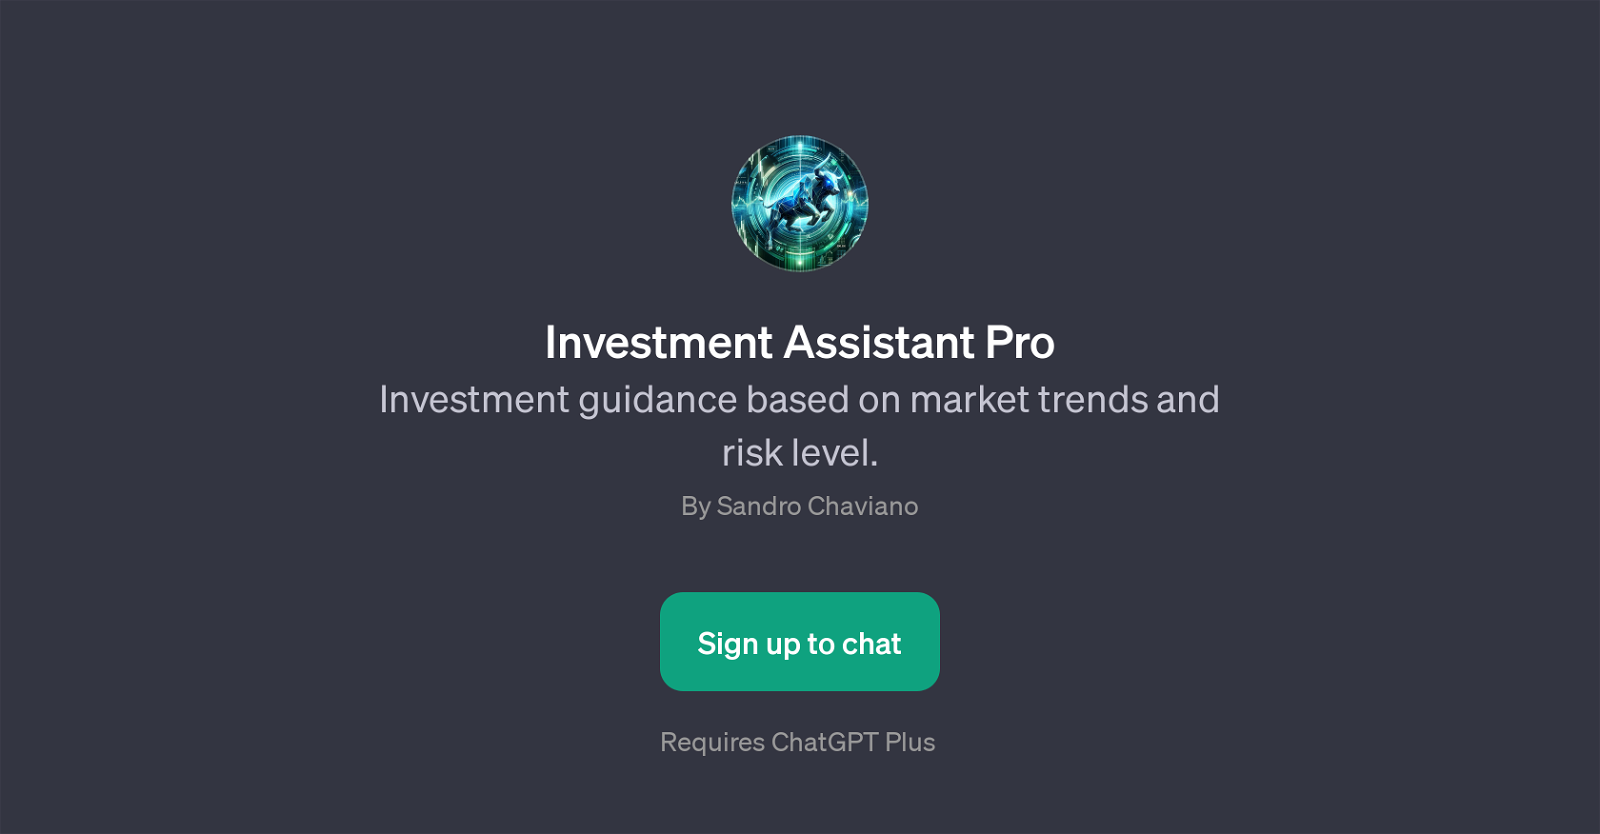 Investment Assistant Pro website